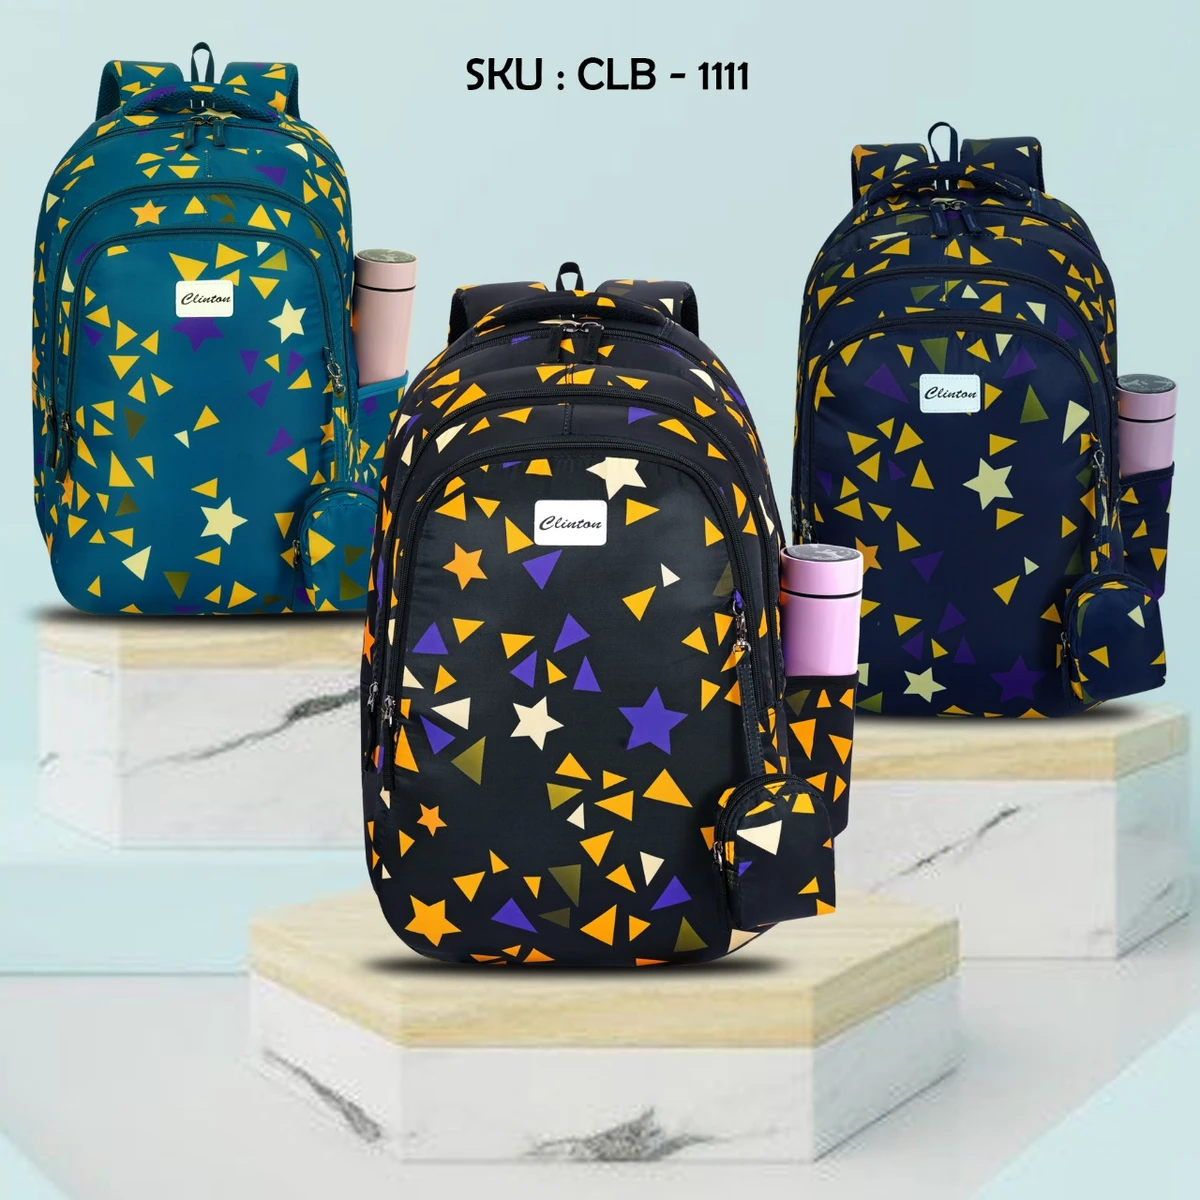 CLB-1111 || Student School Bags Children Girls Cute Starry Backpacks Primary School Boys Large Capacity Backpacks Reflective Safety Bags and Height 17"